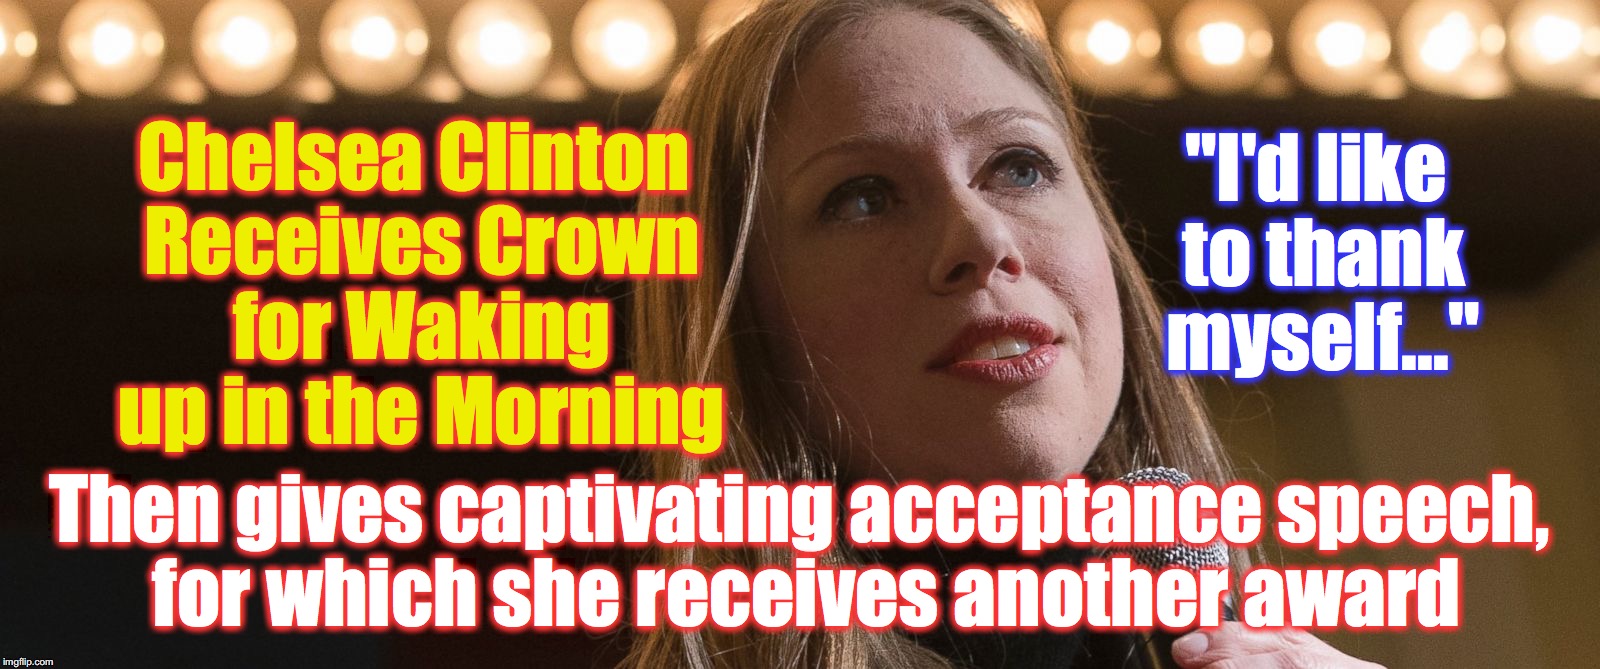 "I'd like to thank myself..."; Chelsea Clinton Receives Crown for Waking up in the Morning; Then gives captivating acceptance speech, for which she receives another award | image tagged in chelsea clinton | made w/ Imgflip meme maker